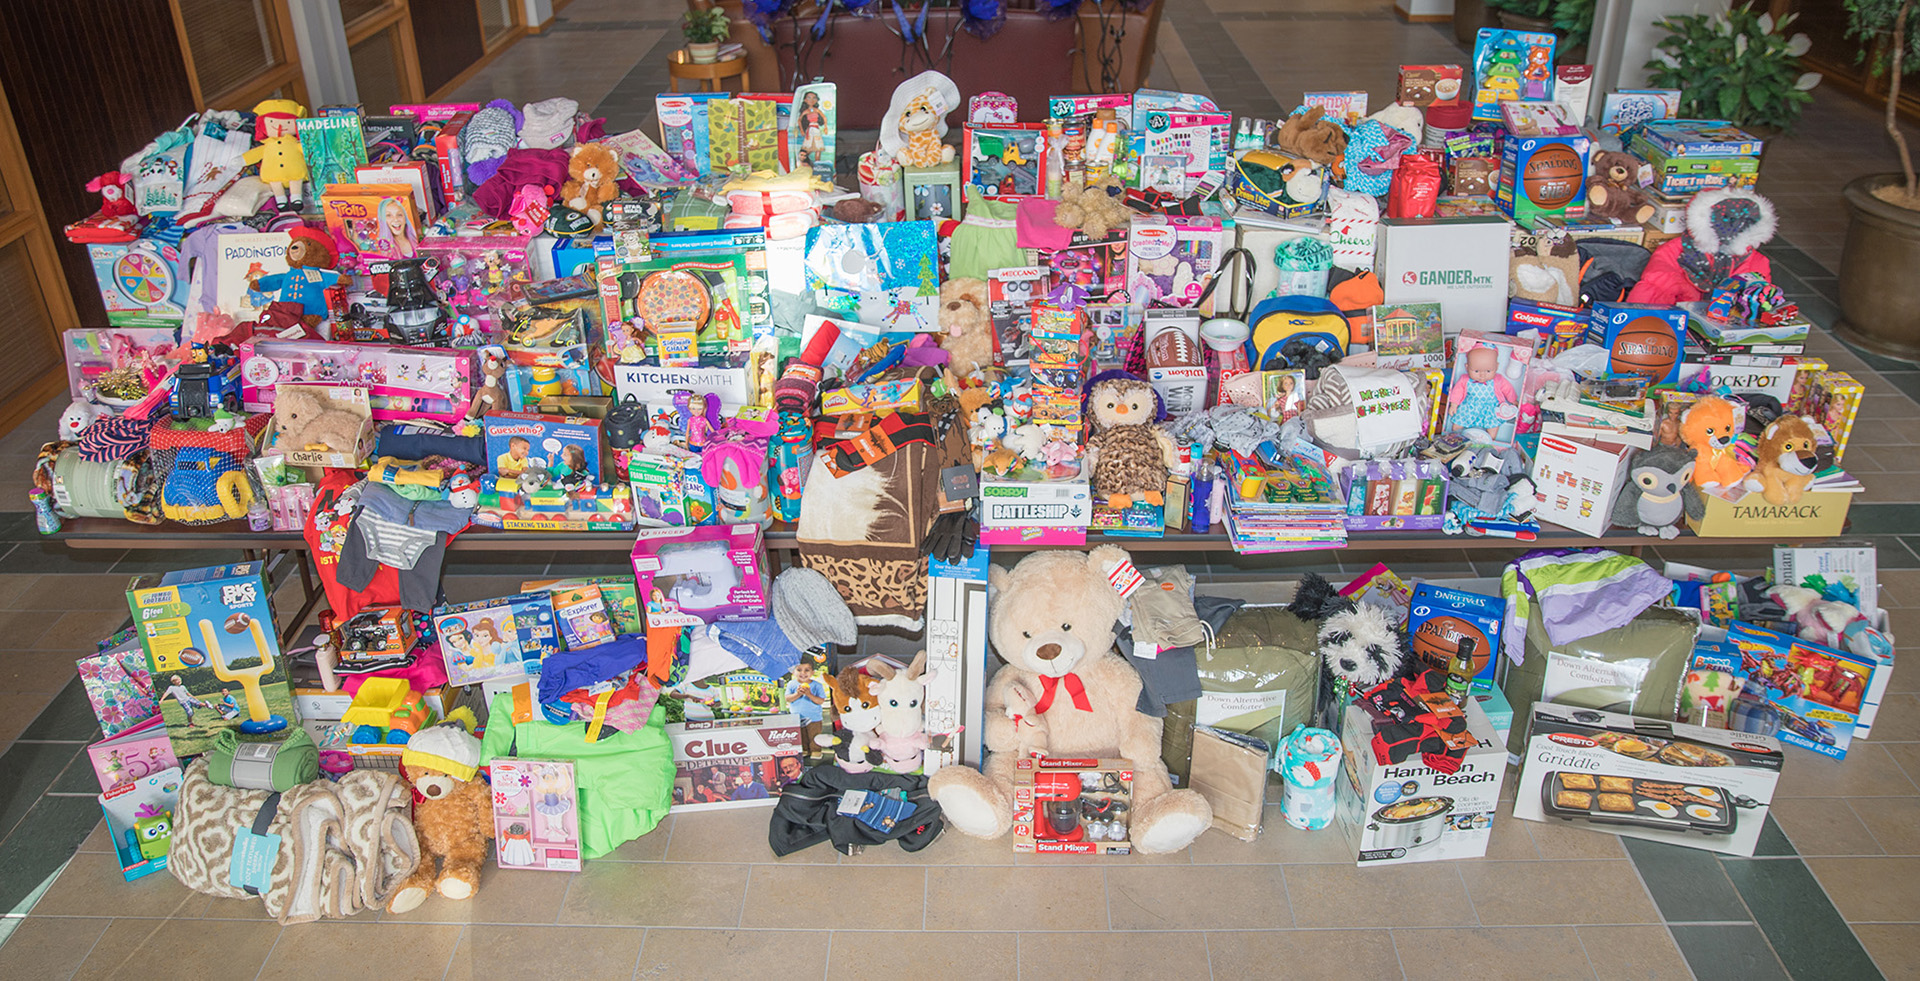 Acuity staff members donated hundreds of toys, clothes, and other household items and nearly $1,200 to the Sheboygan County Department of Health and Human Services.